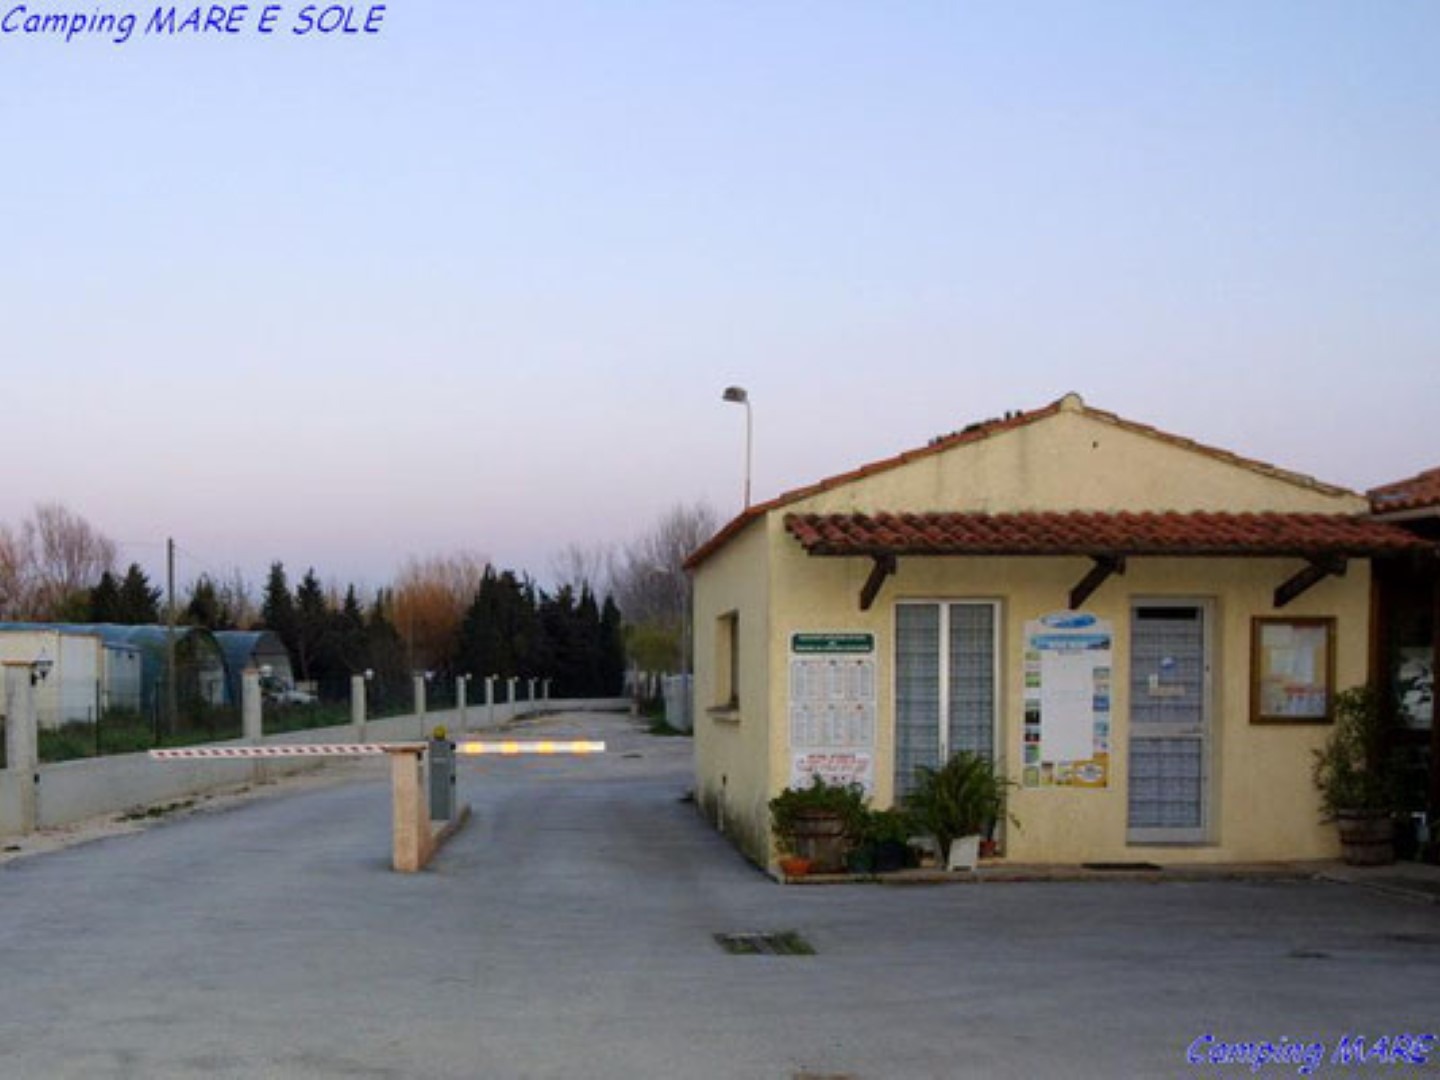 Camping Camping mare e sole Hyres